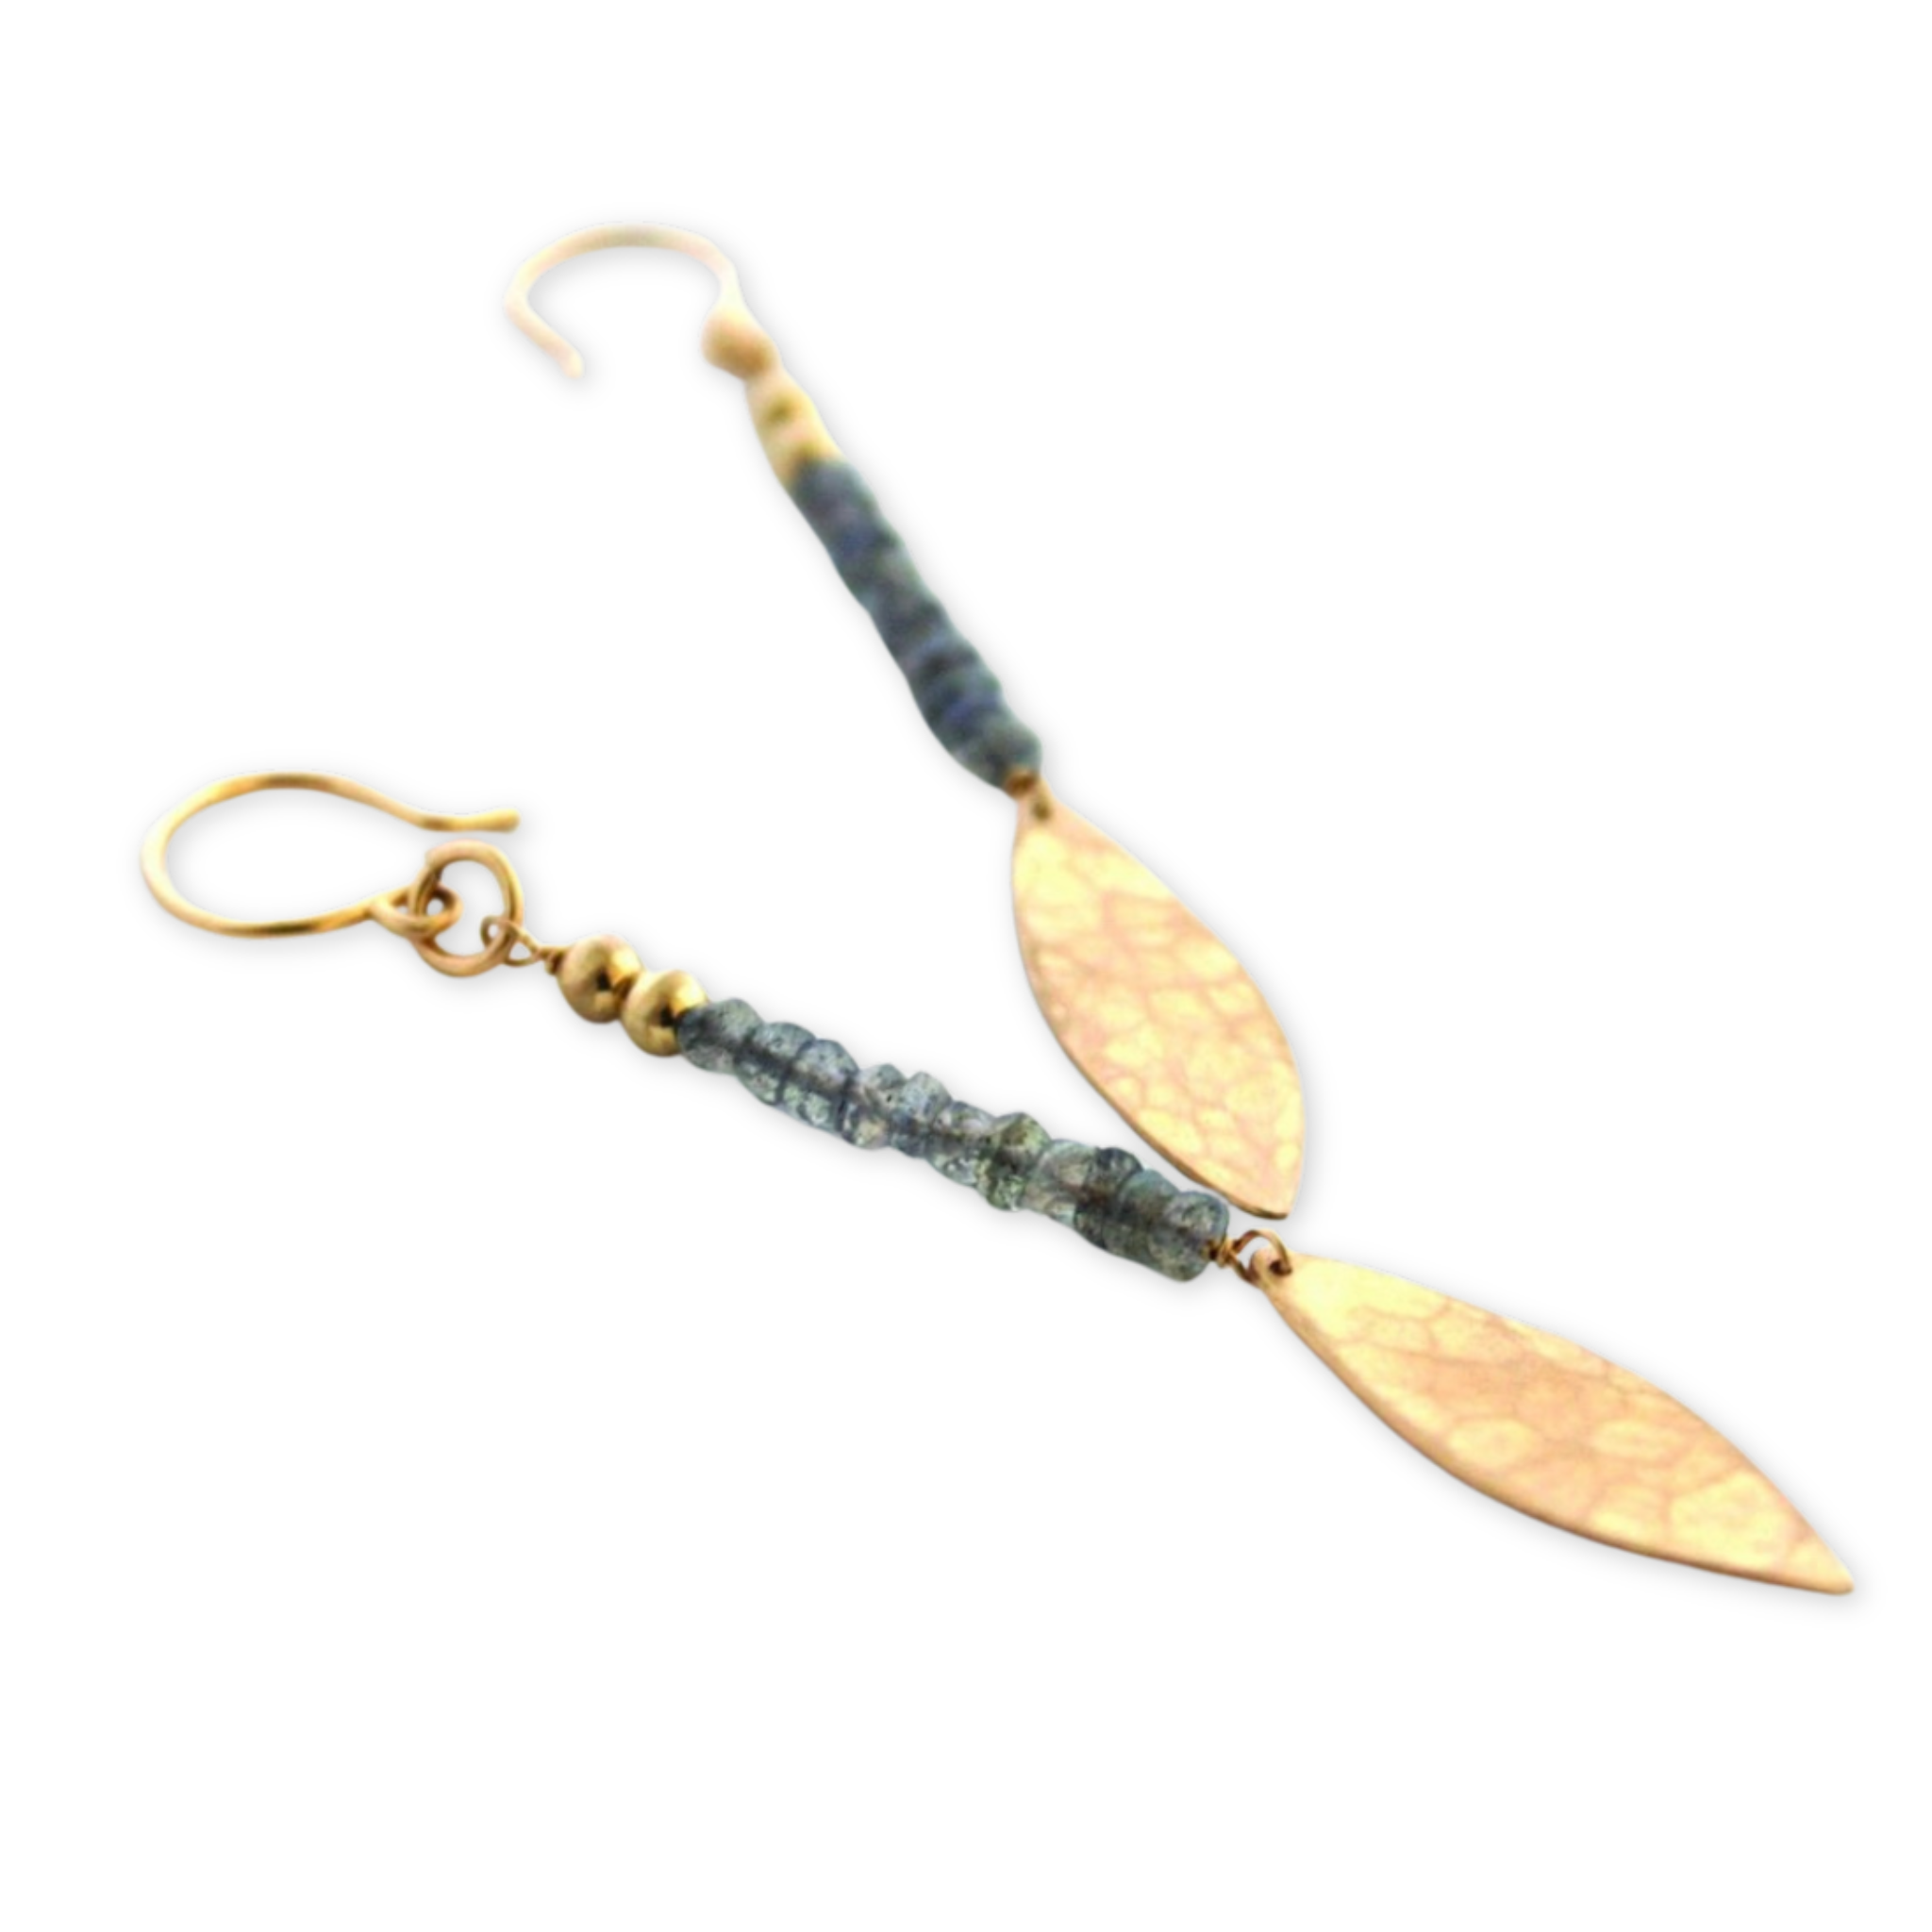 a pair of earrings with row of stones and a small feather pendant